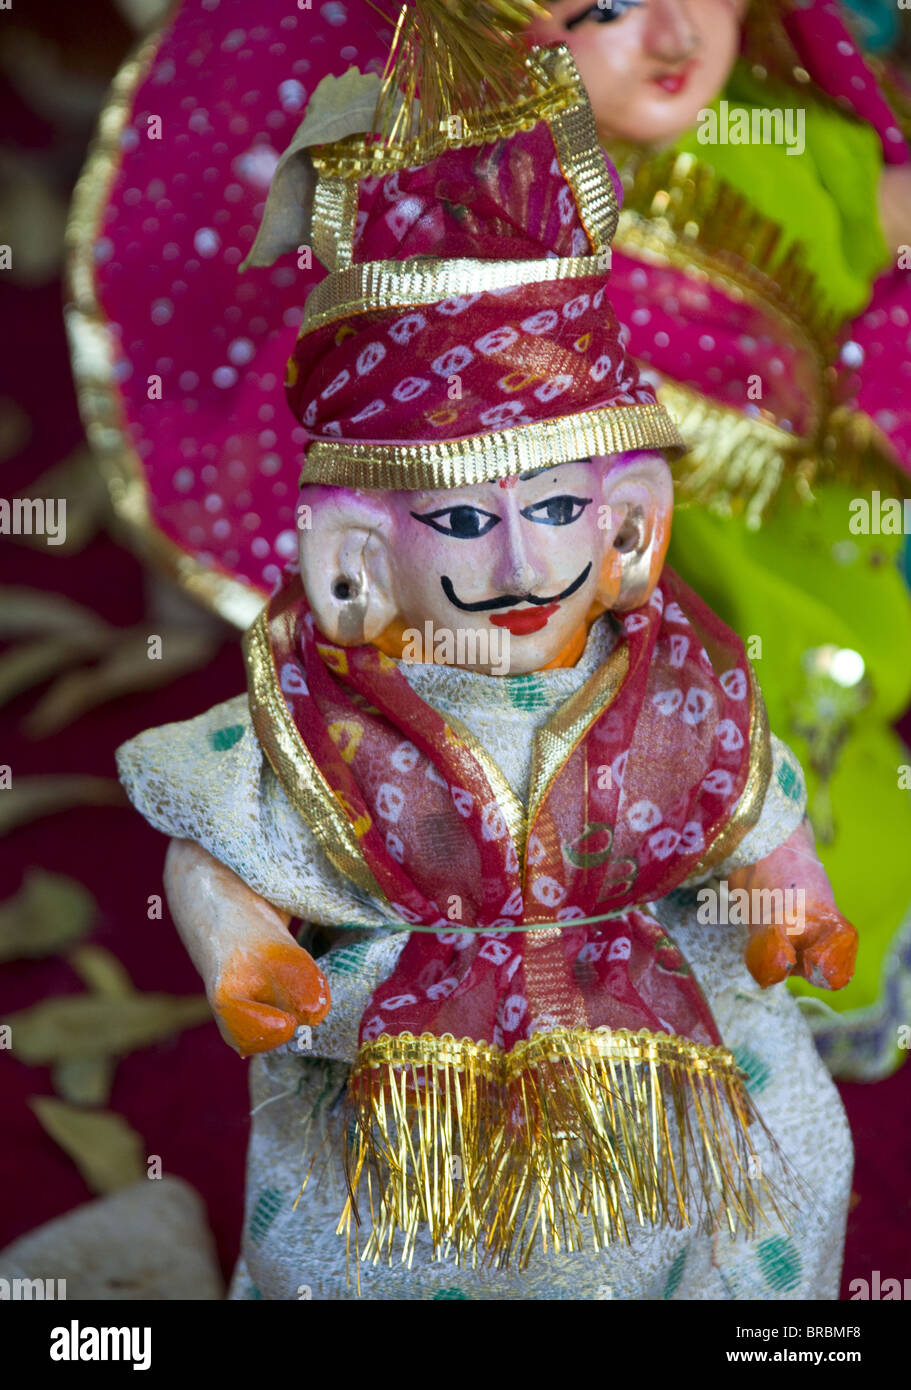 A heritage puppet on sale in Pushkar, Rajasthan, India Stock Photo